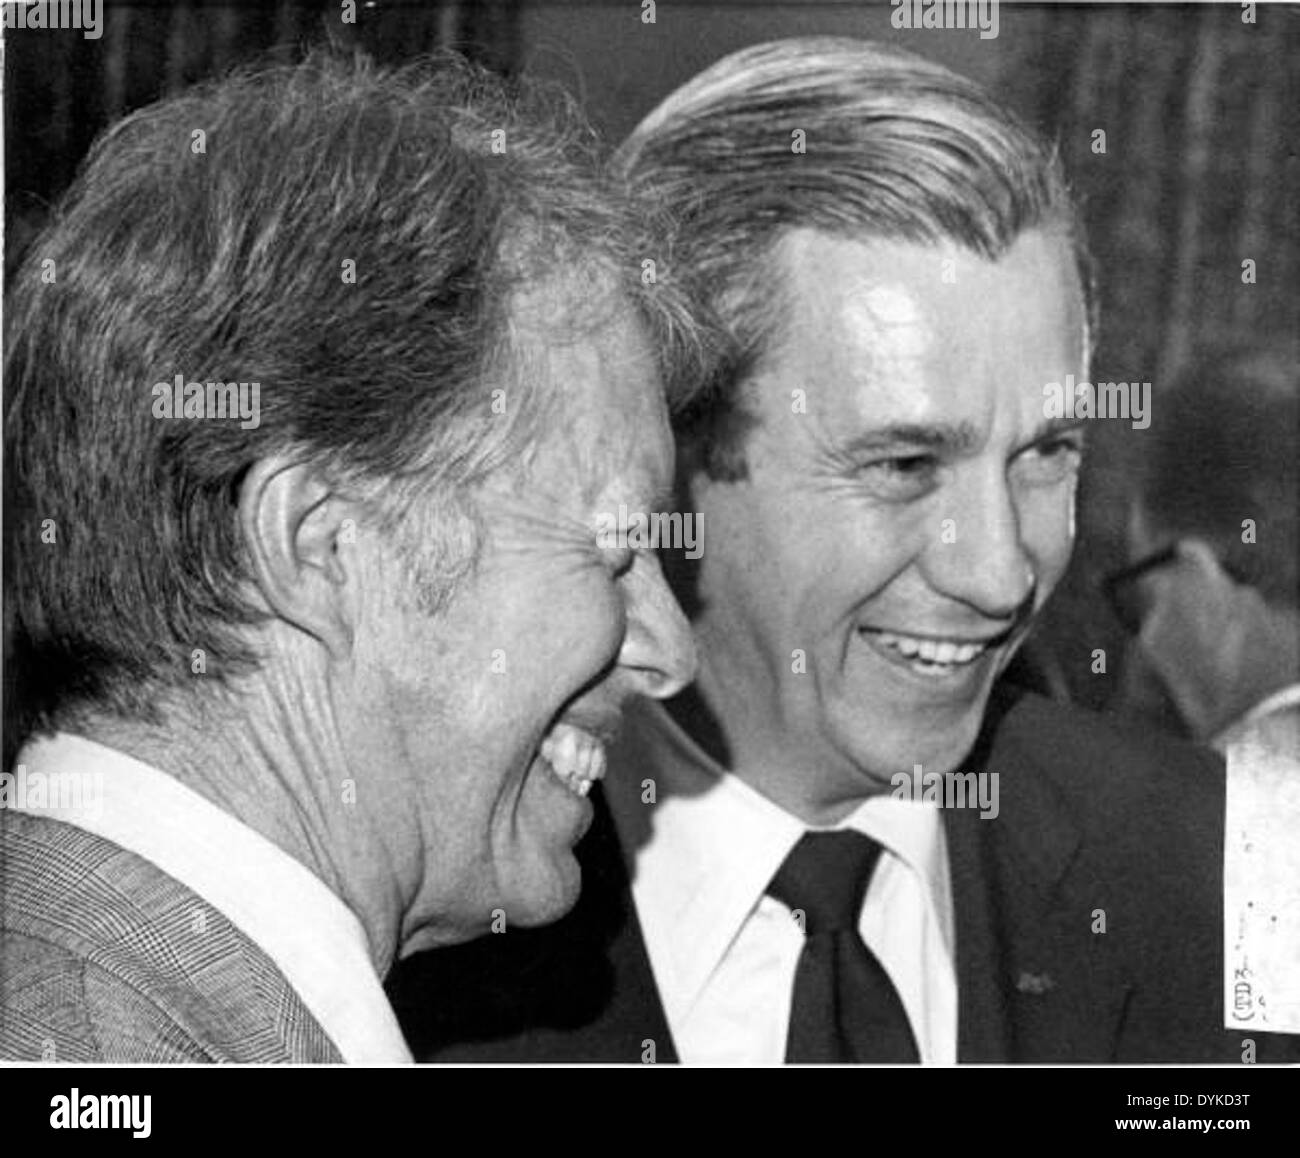 Presidential candidate Jimmy Carter and Florida Governor Reubin Askew Stock Photo